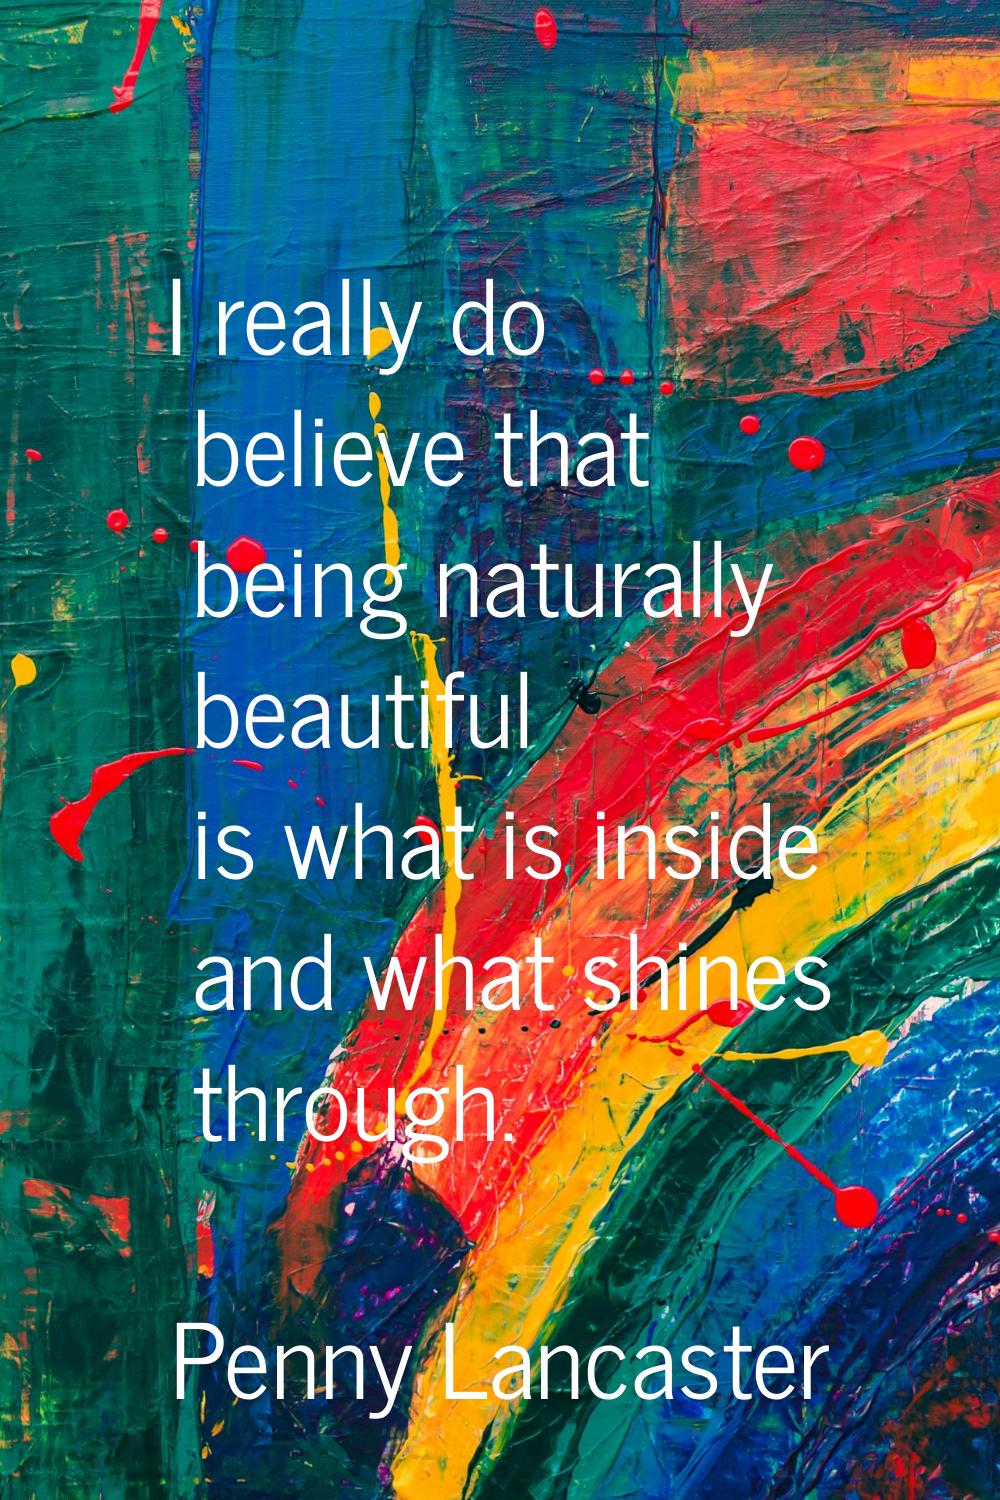 I really do believe that being naturally beautiful is what is inside and what shines through.